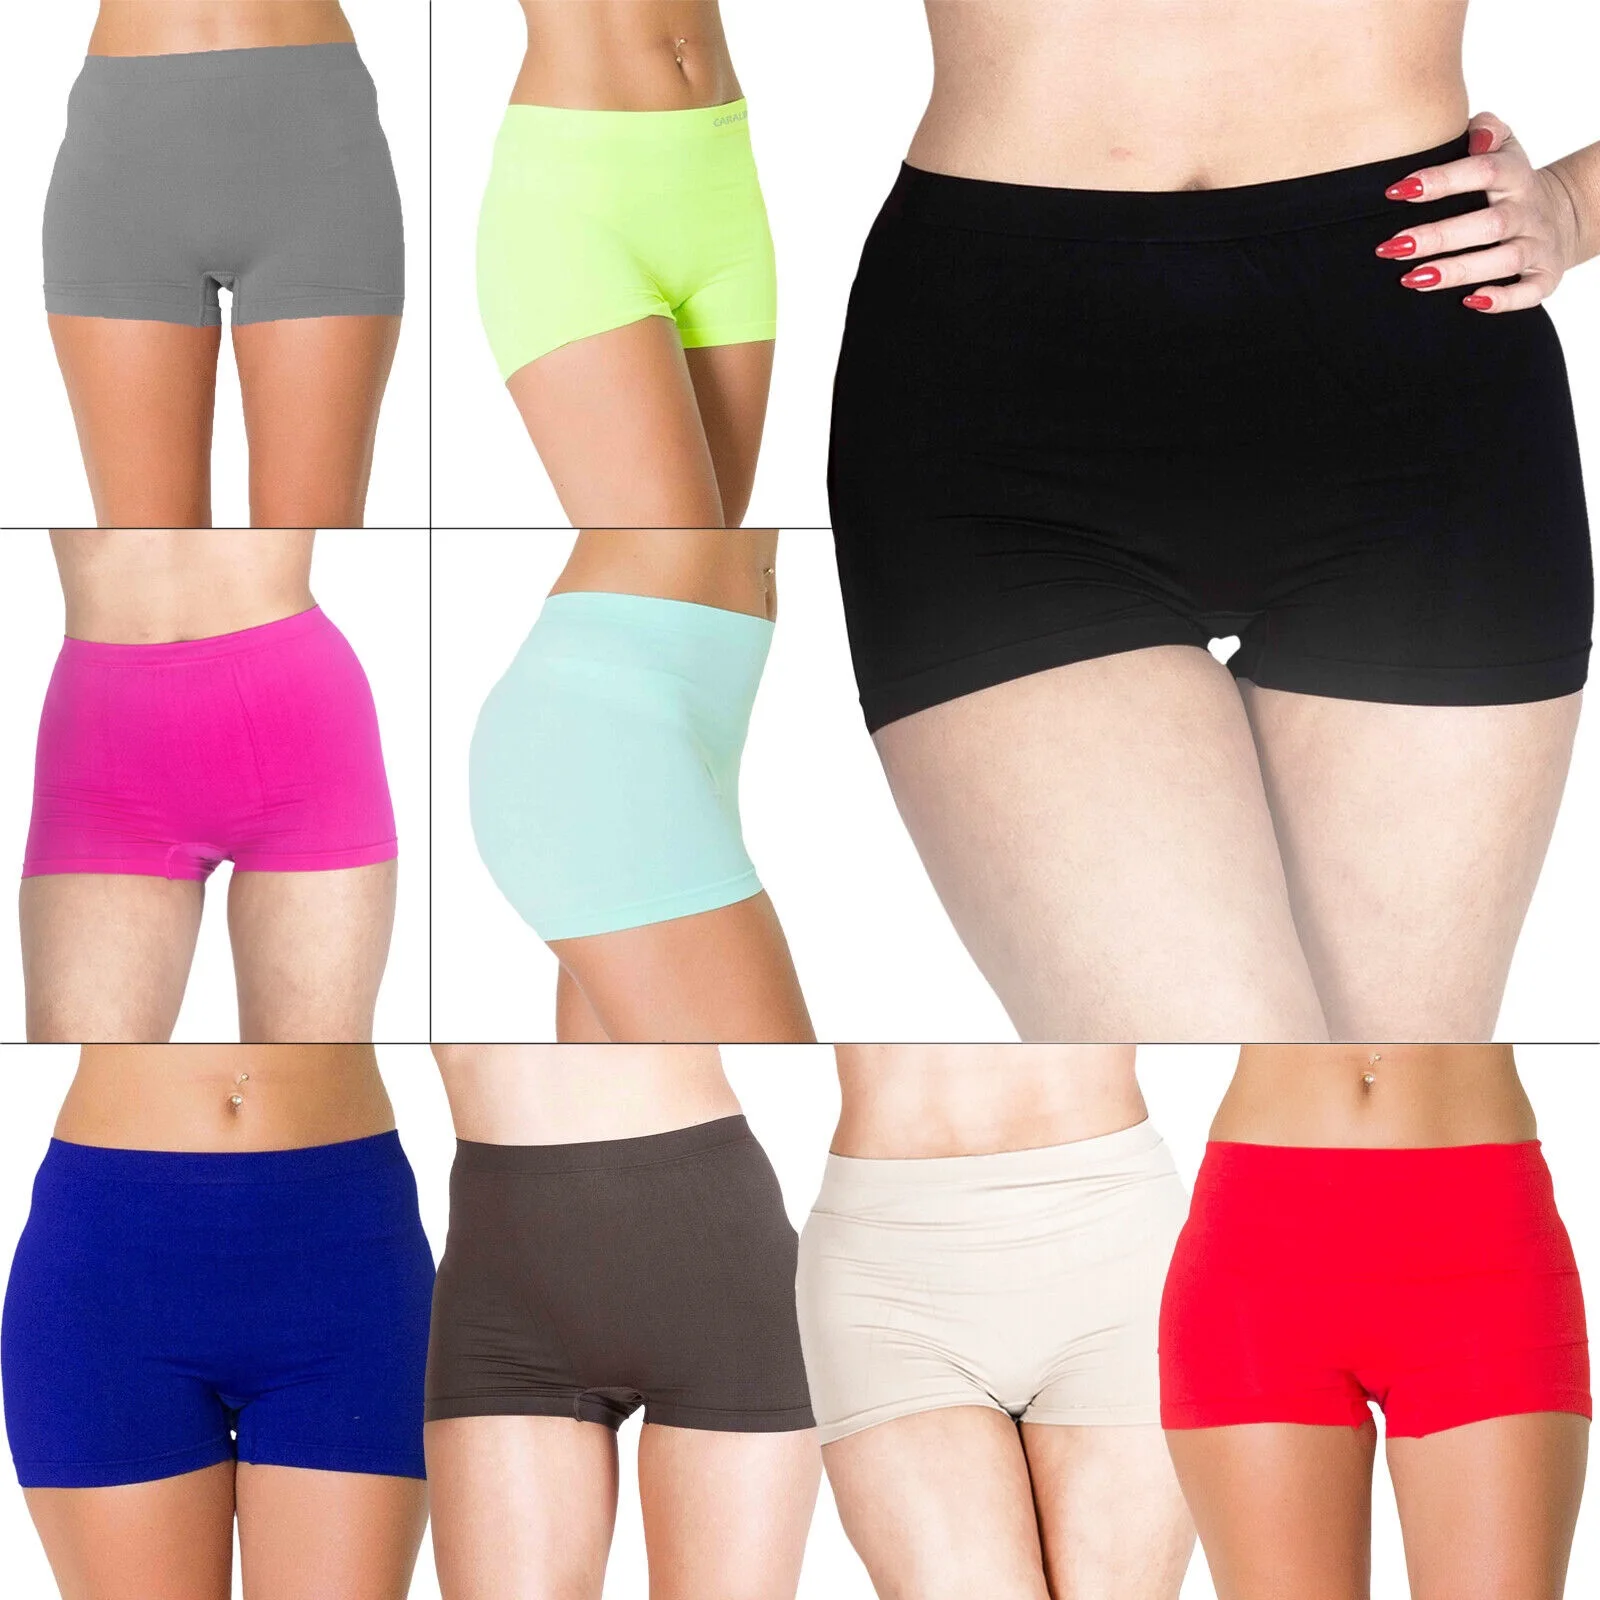 Ladies Underwear Shorts - 100% Cooton Factory Outlet Branded Tied